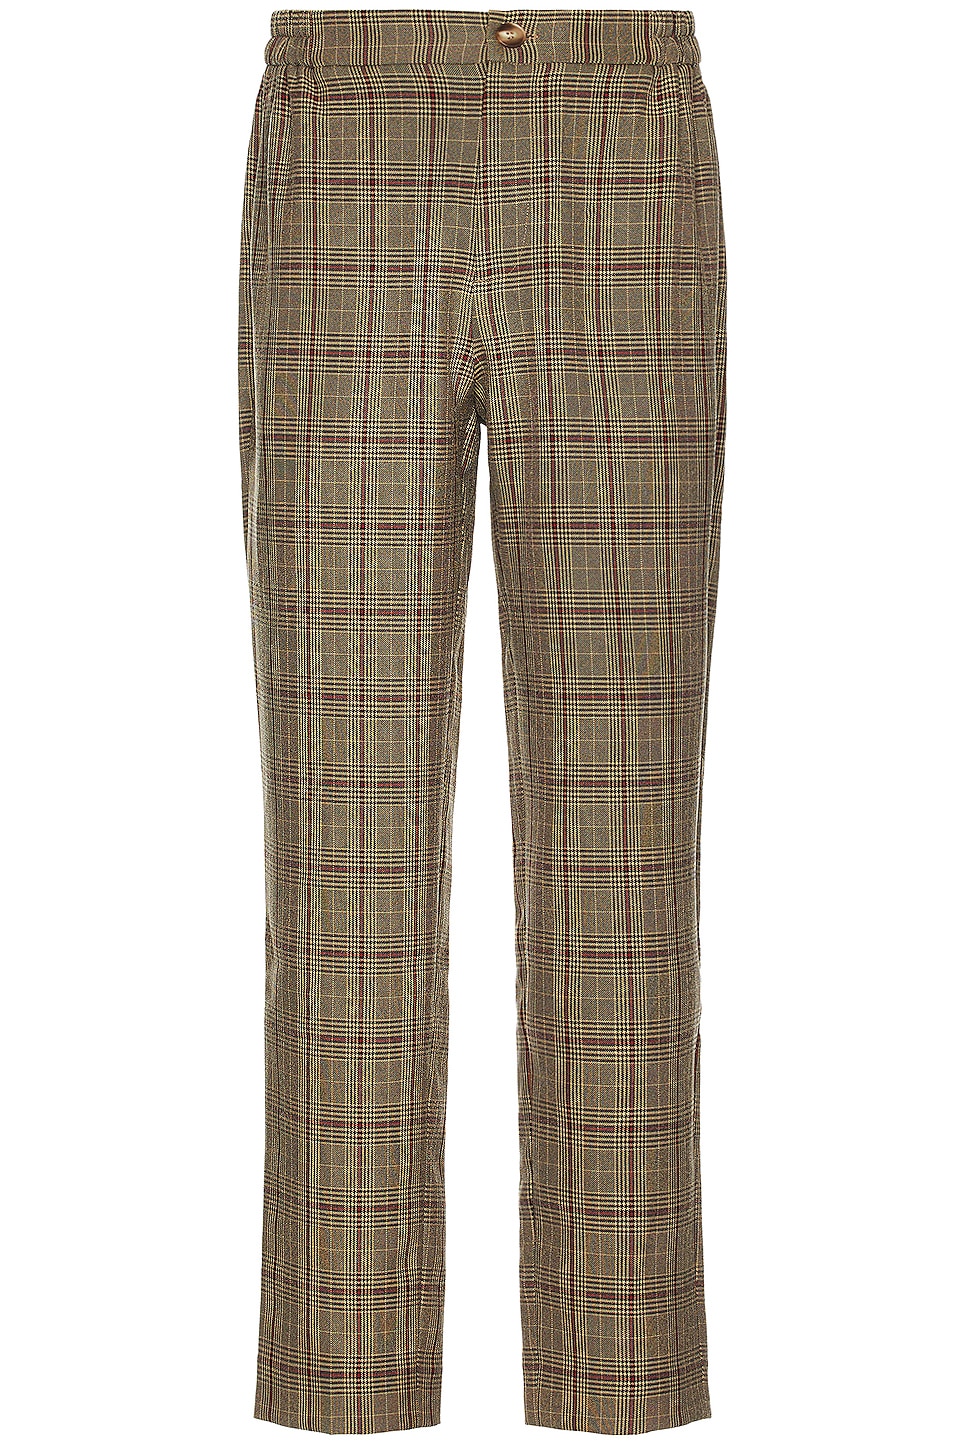 Image 1 of WAO Plaid Trouser in brown & black